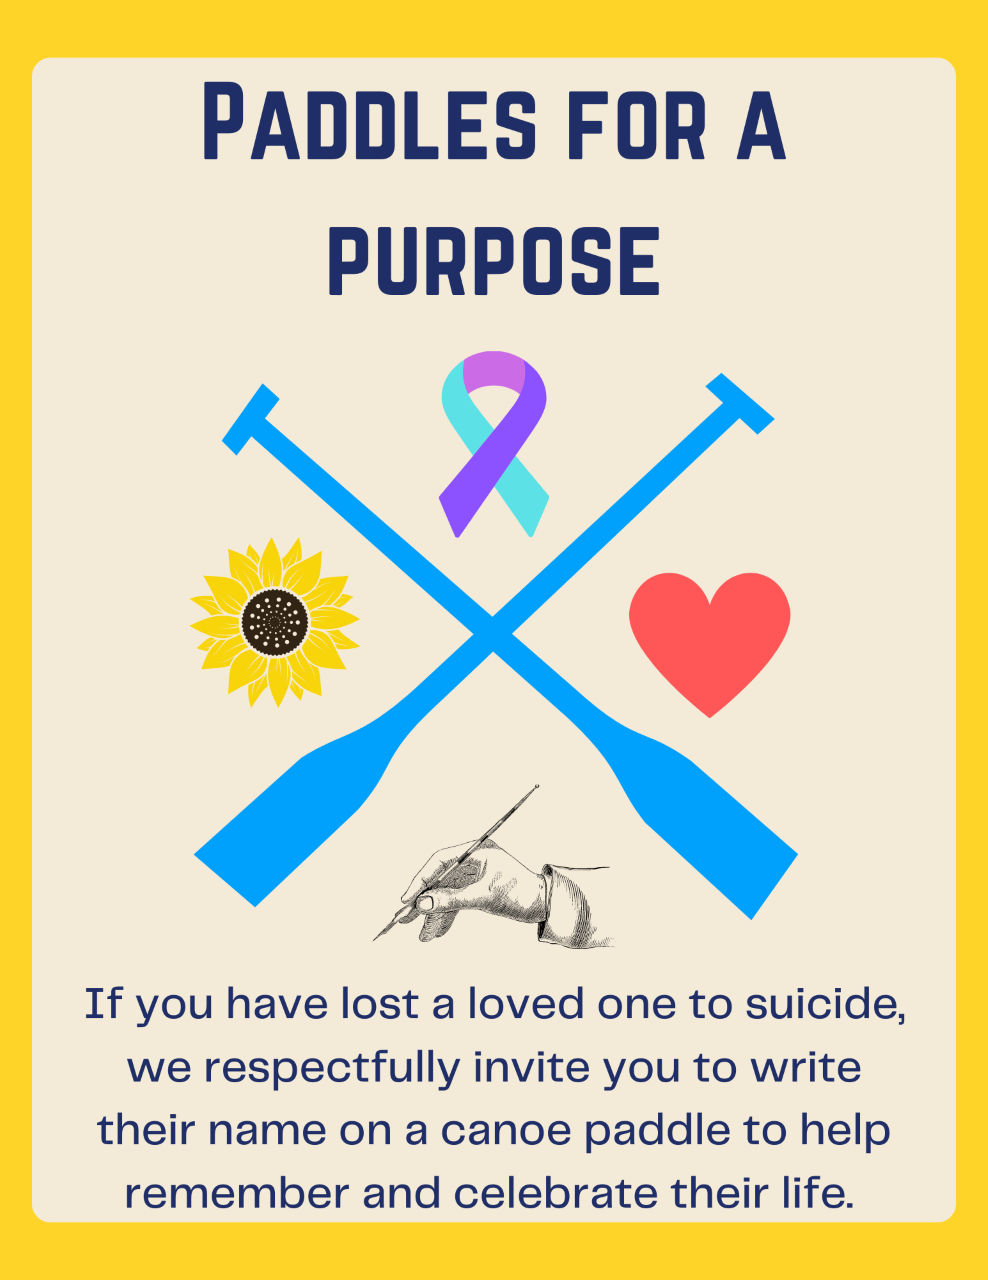 Paddles for a Purpose